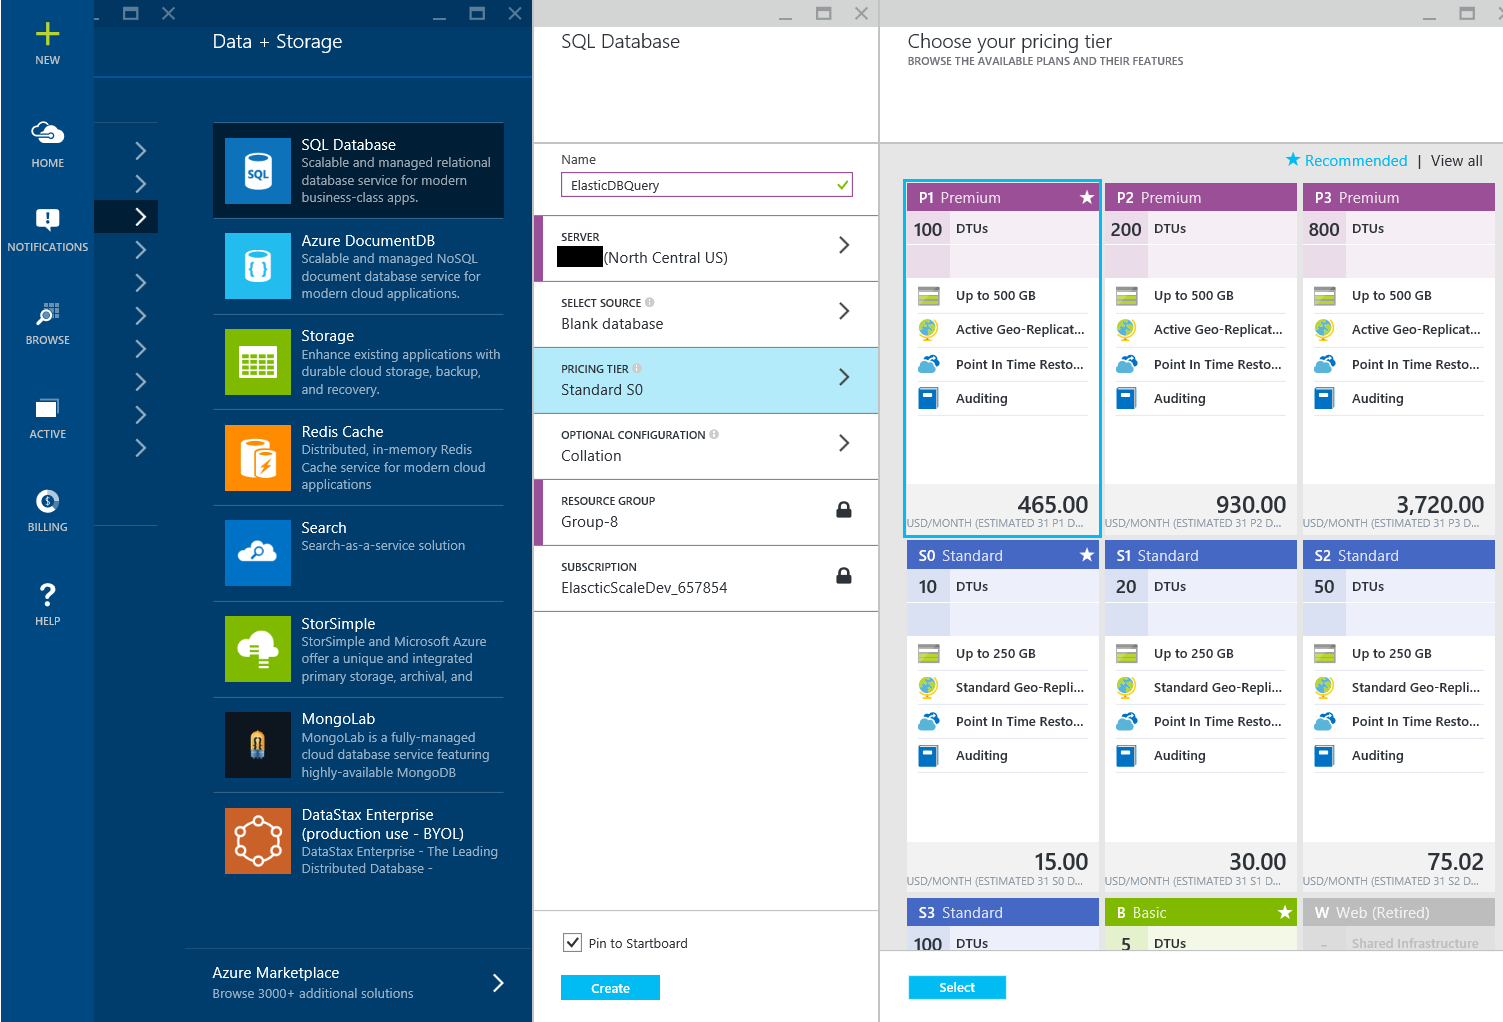 Azure portal and pricing tier